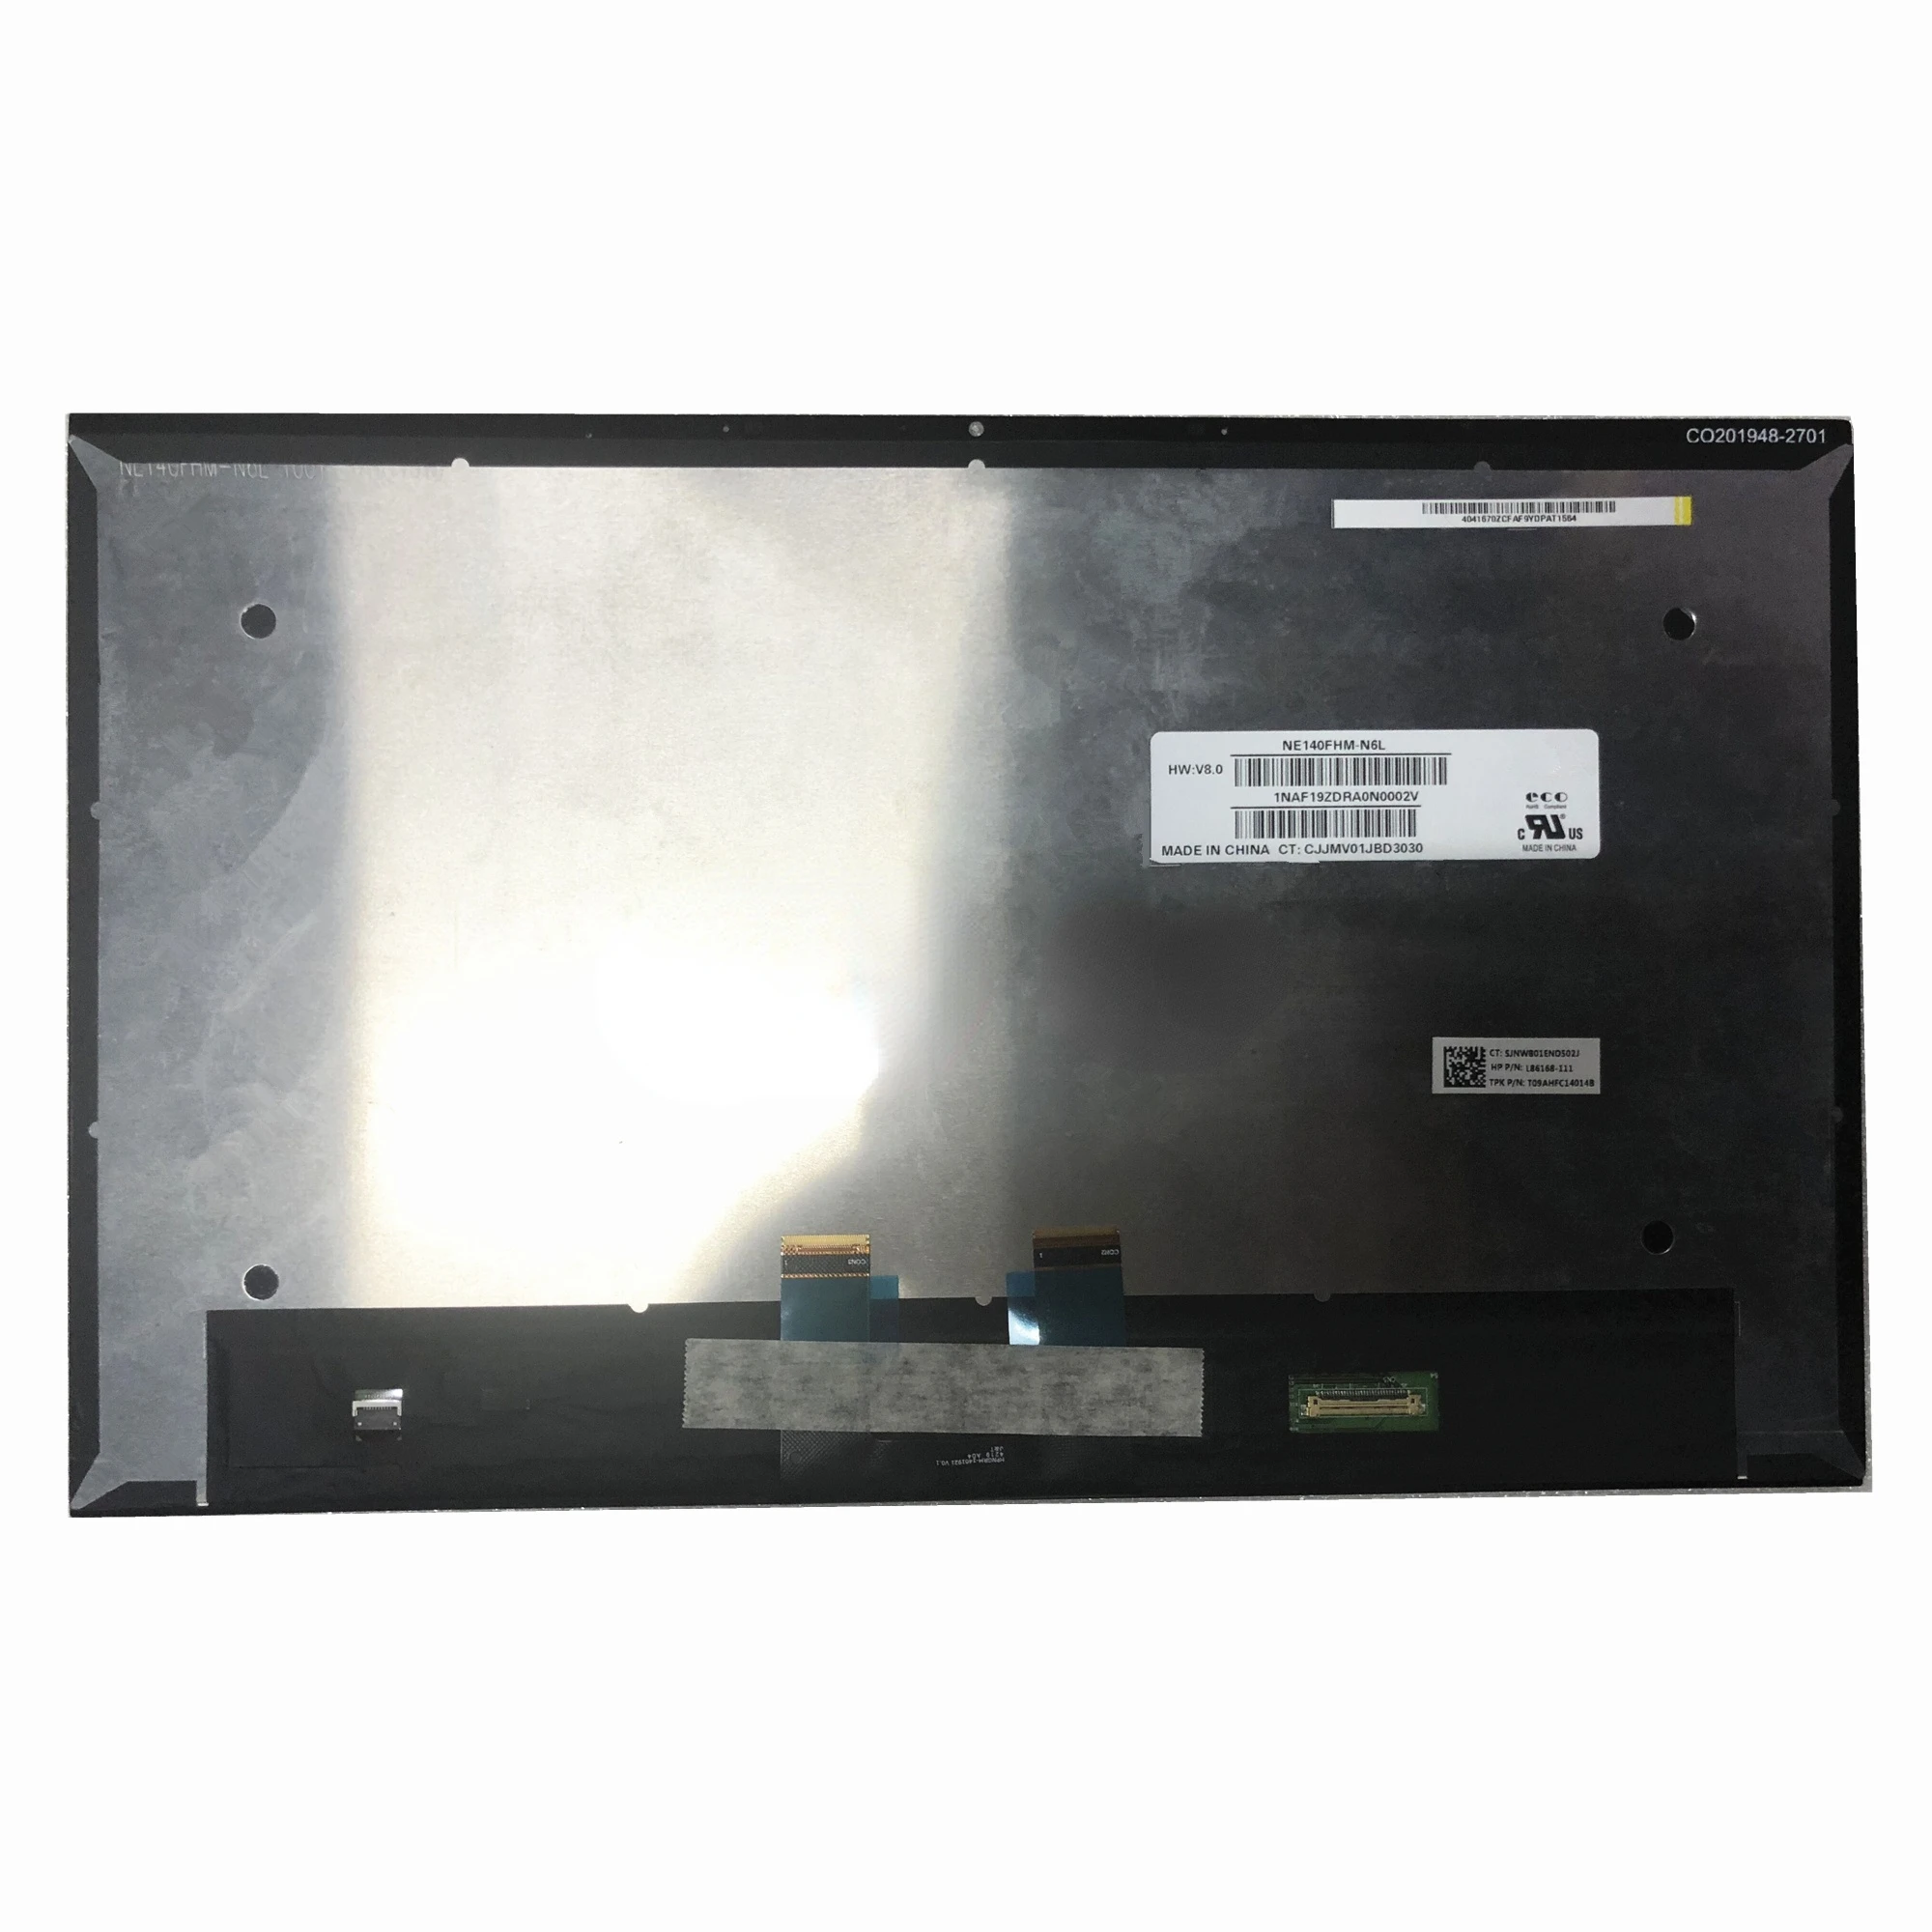 

NE140FHM-N6L 14.0'' FHD Laptop LCD Touch Screen Digitizer Assembly for HP Replacement P/N: L86168-111 CT: CJJMV01JBD3030